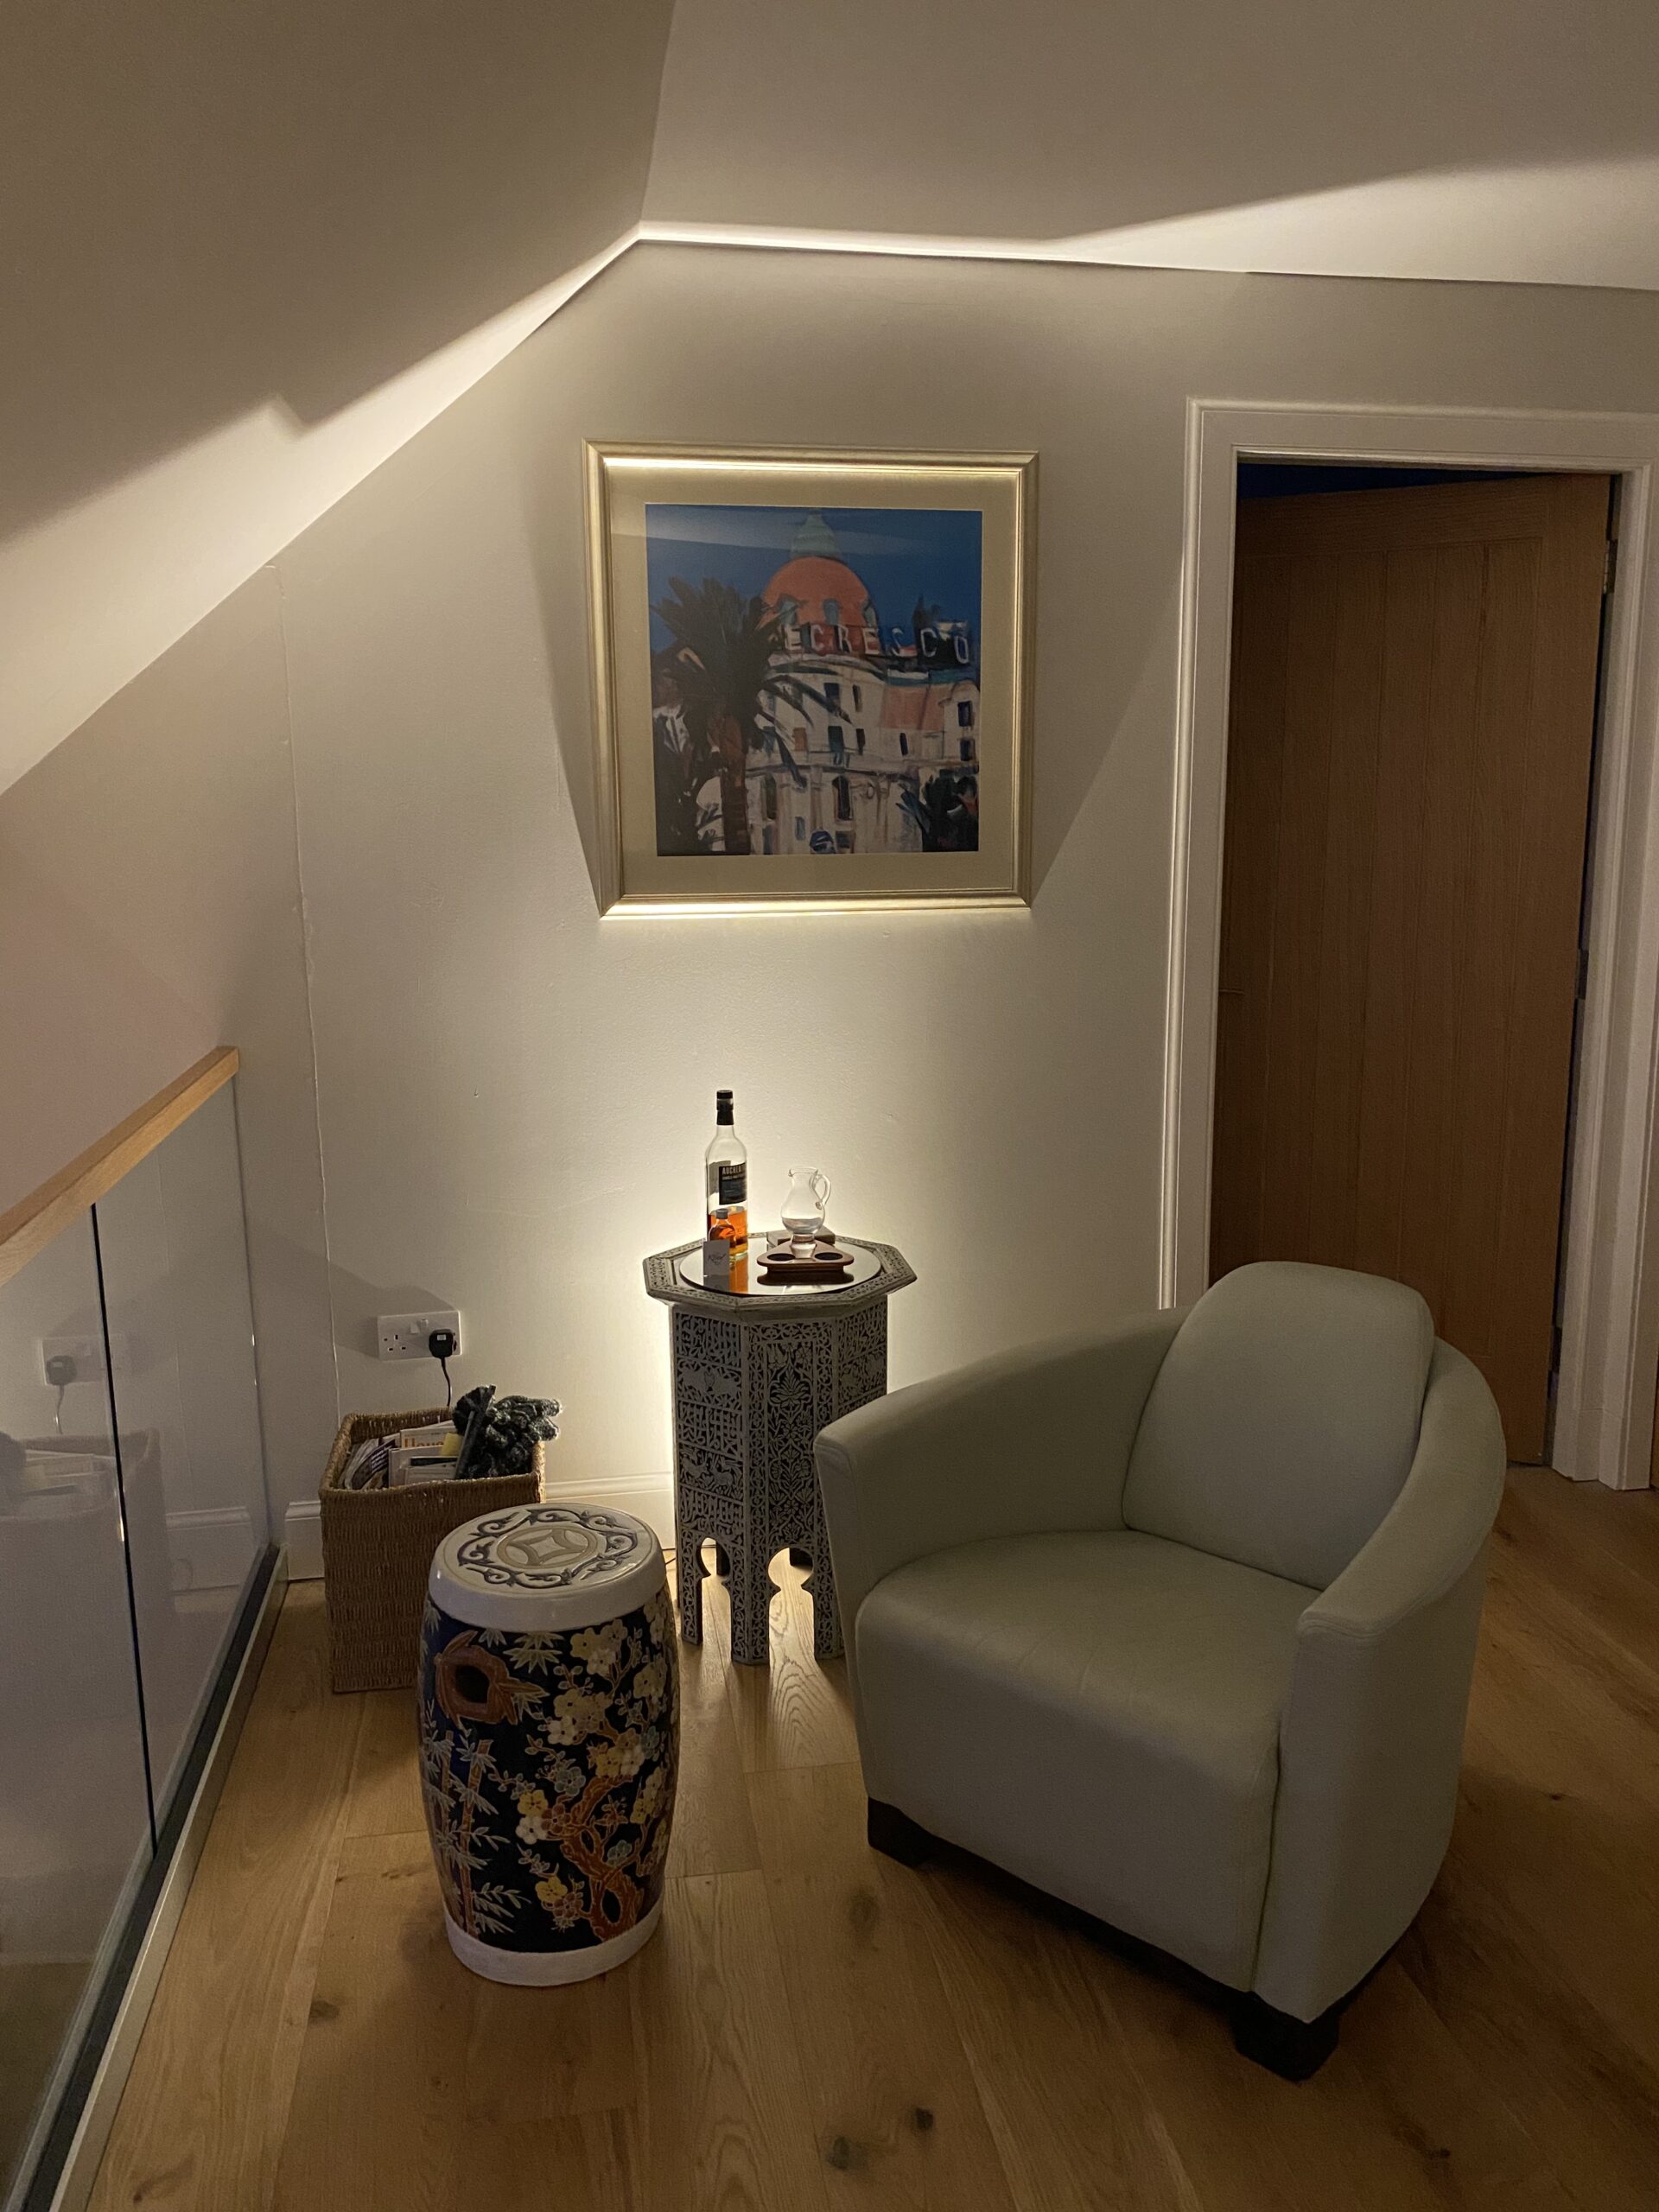 Top tips for cosy lighting in your home. A photo of a home interior with soft lighting and armchair designed by Cat Lighting, specialist lighting designer